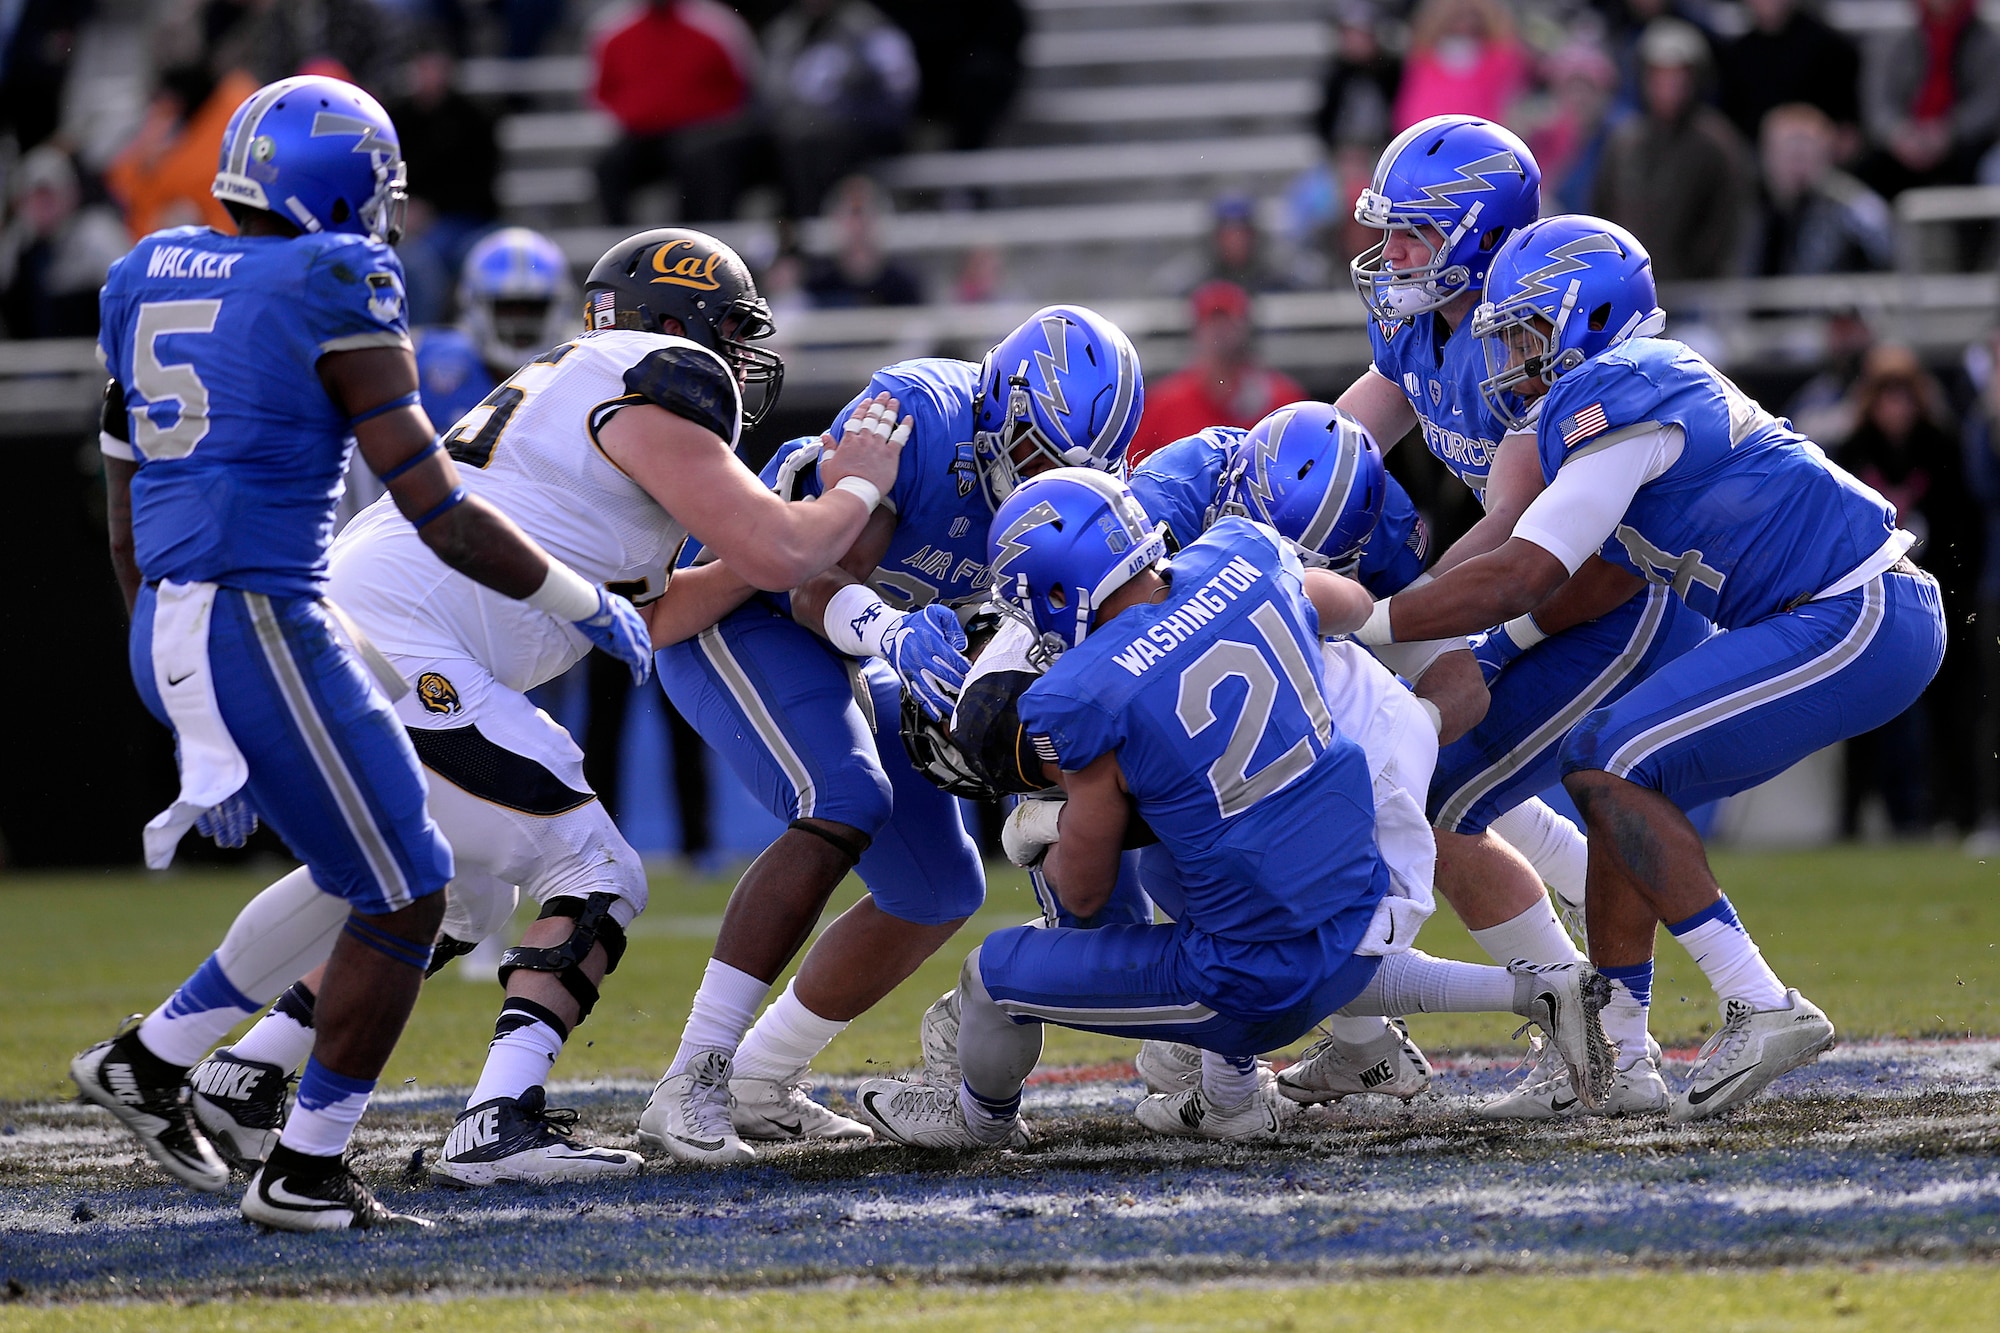 Several Air Force players tackle a California player during the Armed Forces Bowl Dec. 29, 2015, in Fort Worth, Texas. The Golden Bears beat the Falcons 55-36. (U.S. Air Force photo/Mike Kaplan)